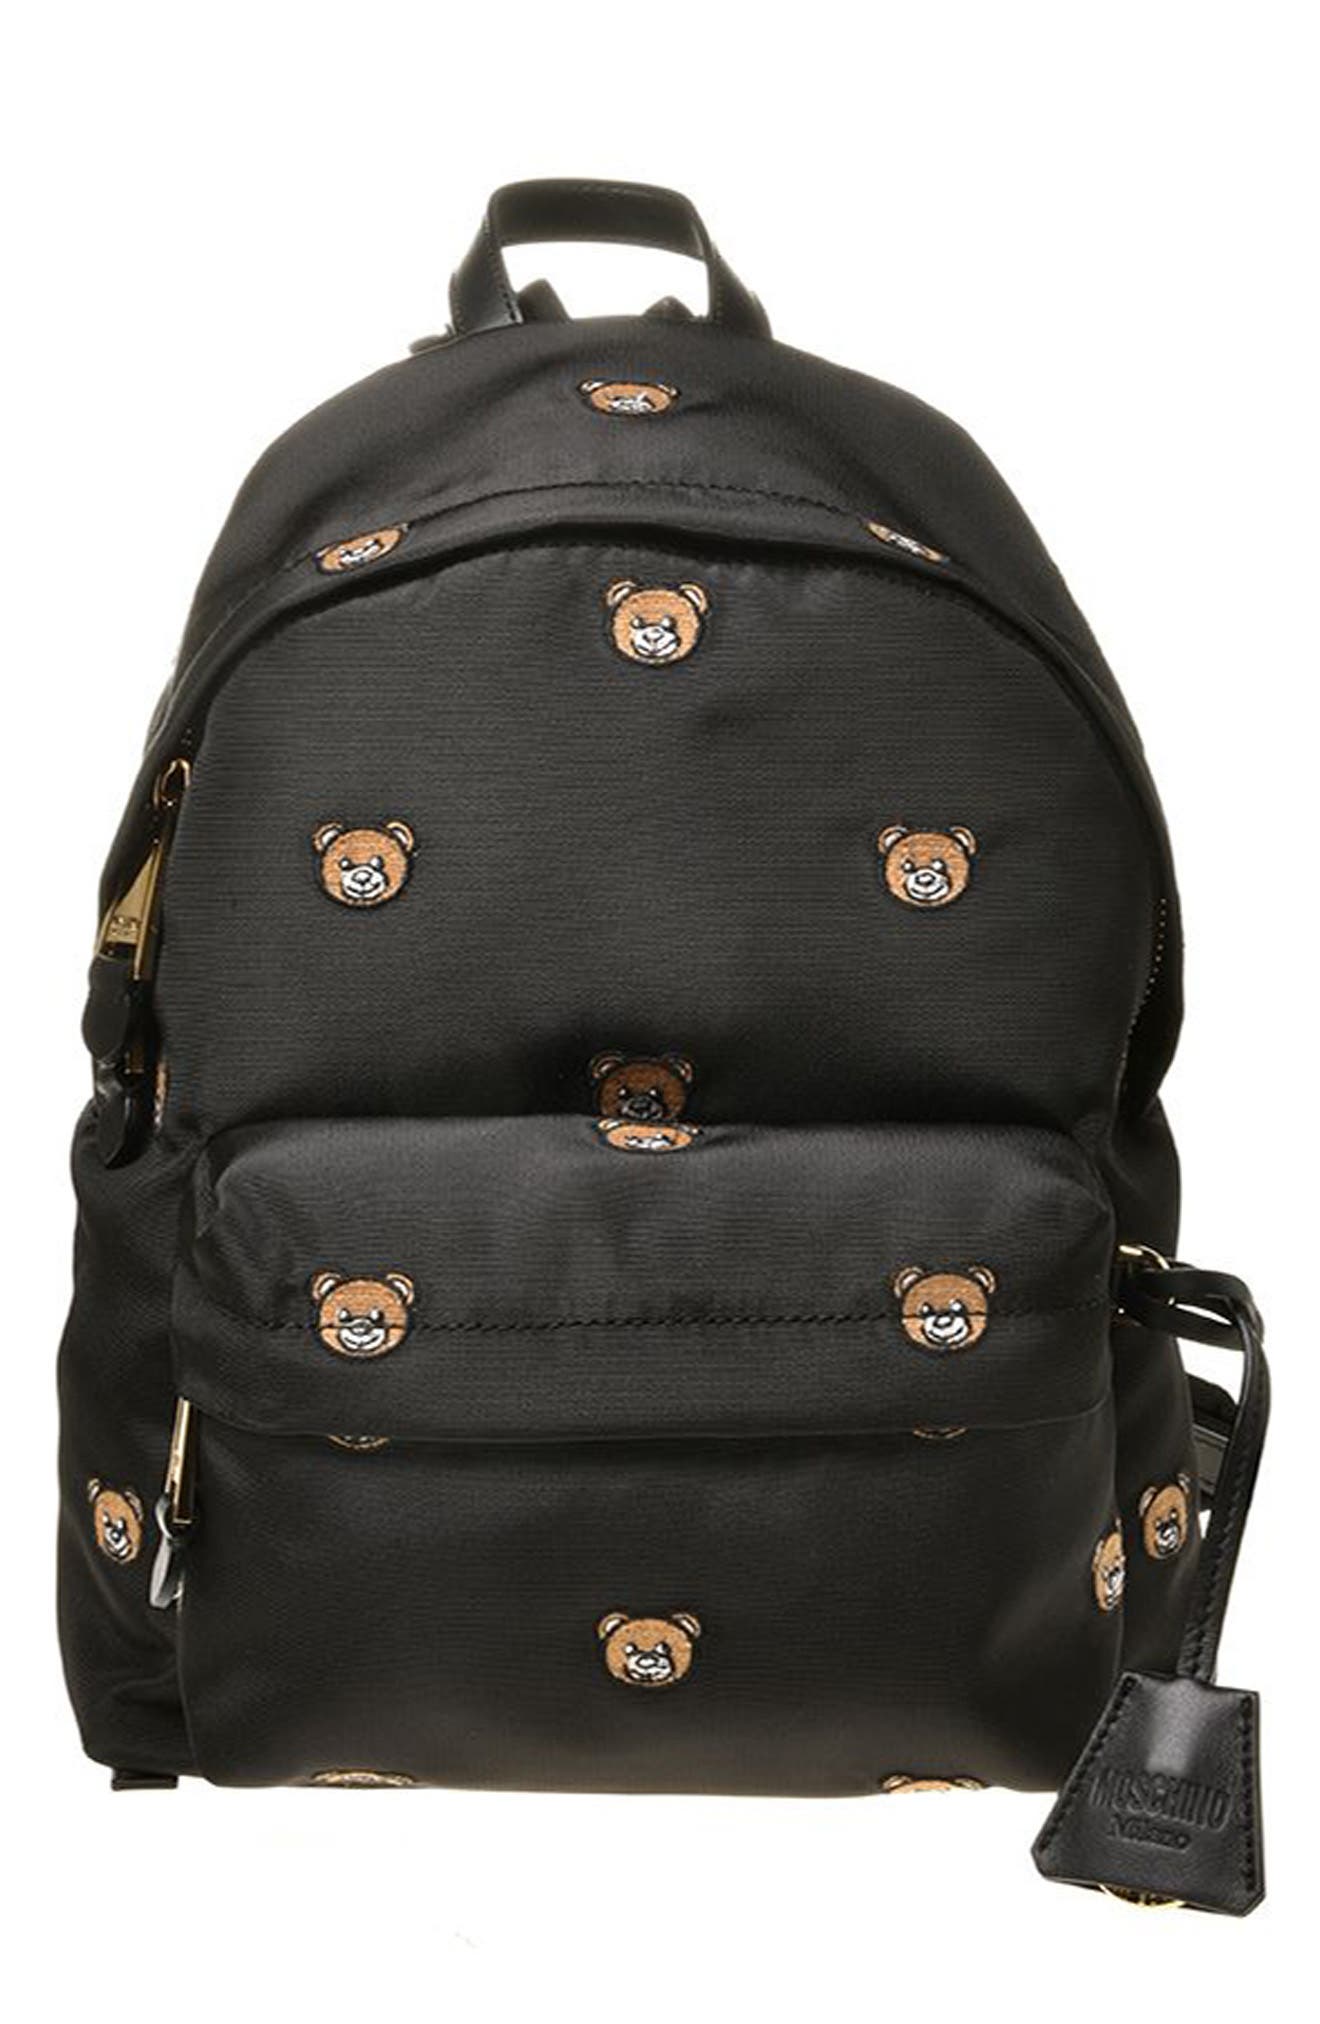 MOSCHINO Embroidered Teddy Backpack in Fantasy Print Black